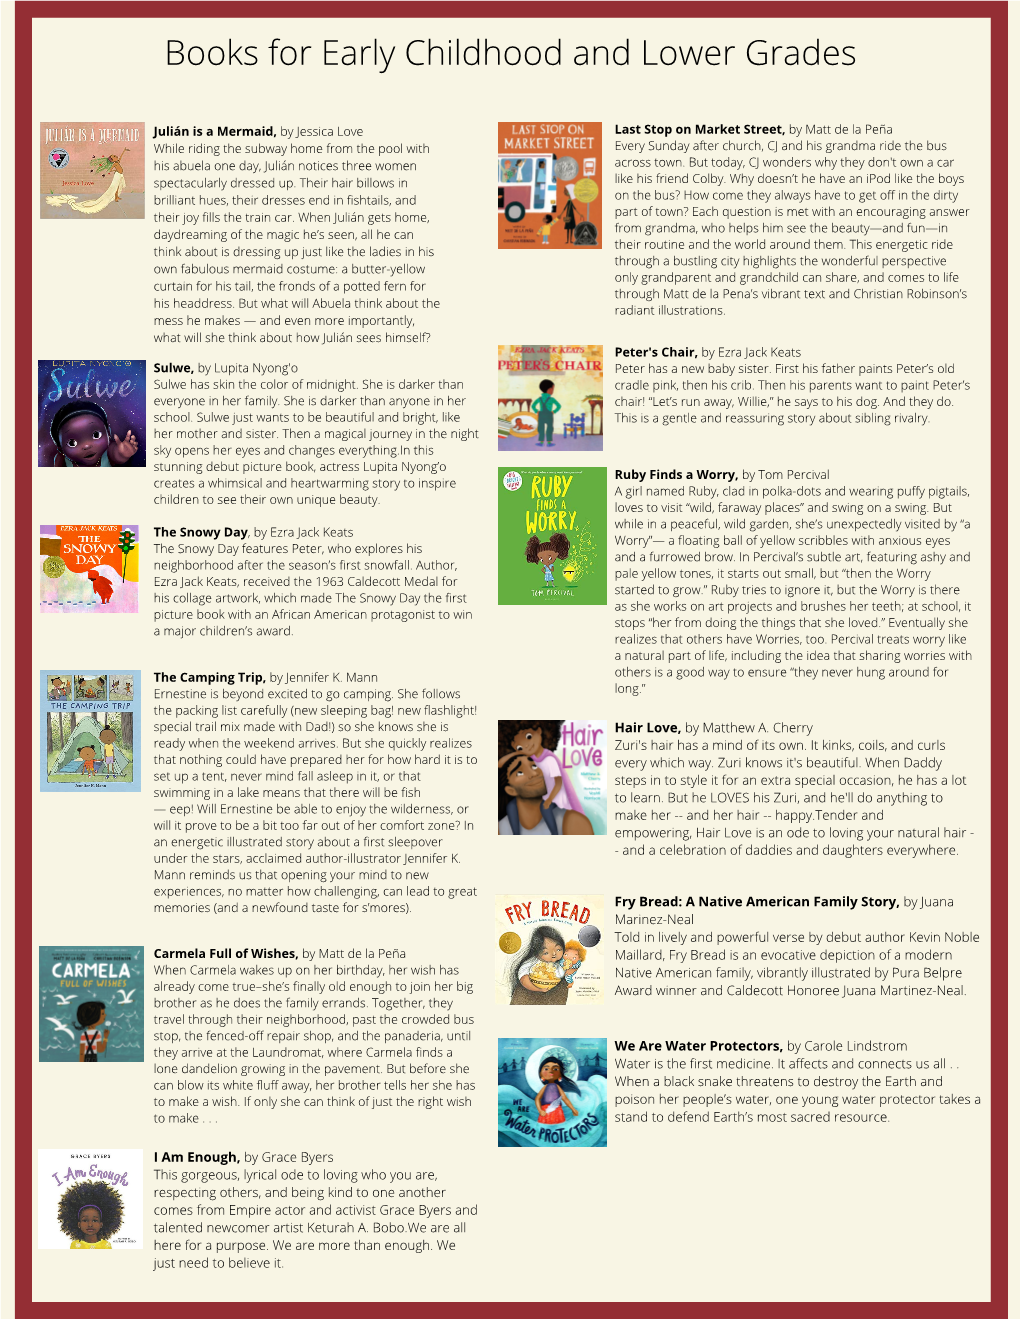 Books for Early Childhood and Lower Grades